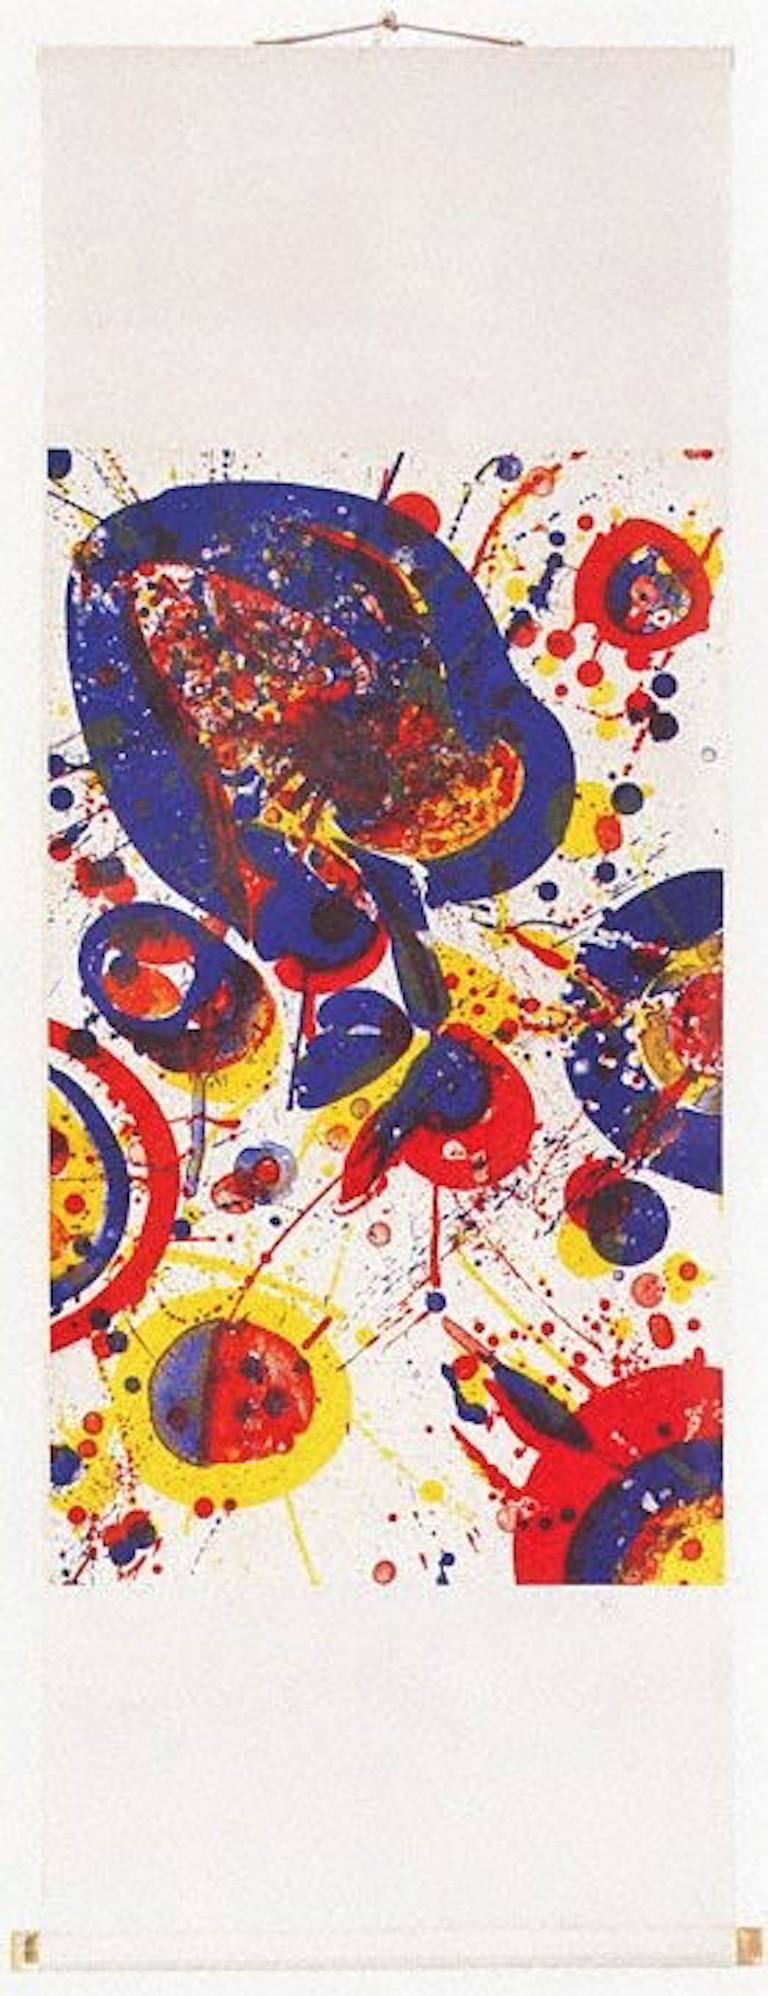 A remarkable work of art, An Other Set – X was created by Sam Francis in 1964 as one of eight original lithographs in color in the famed, Pasadena Box portfolio.  Printed on Japanese rice paper, then mounted to a silk scroll, this spectacular print